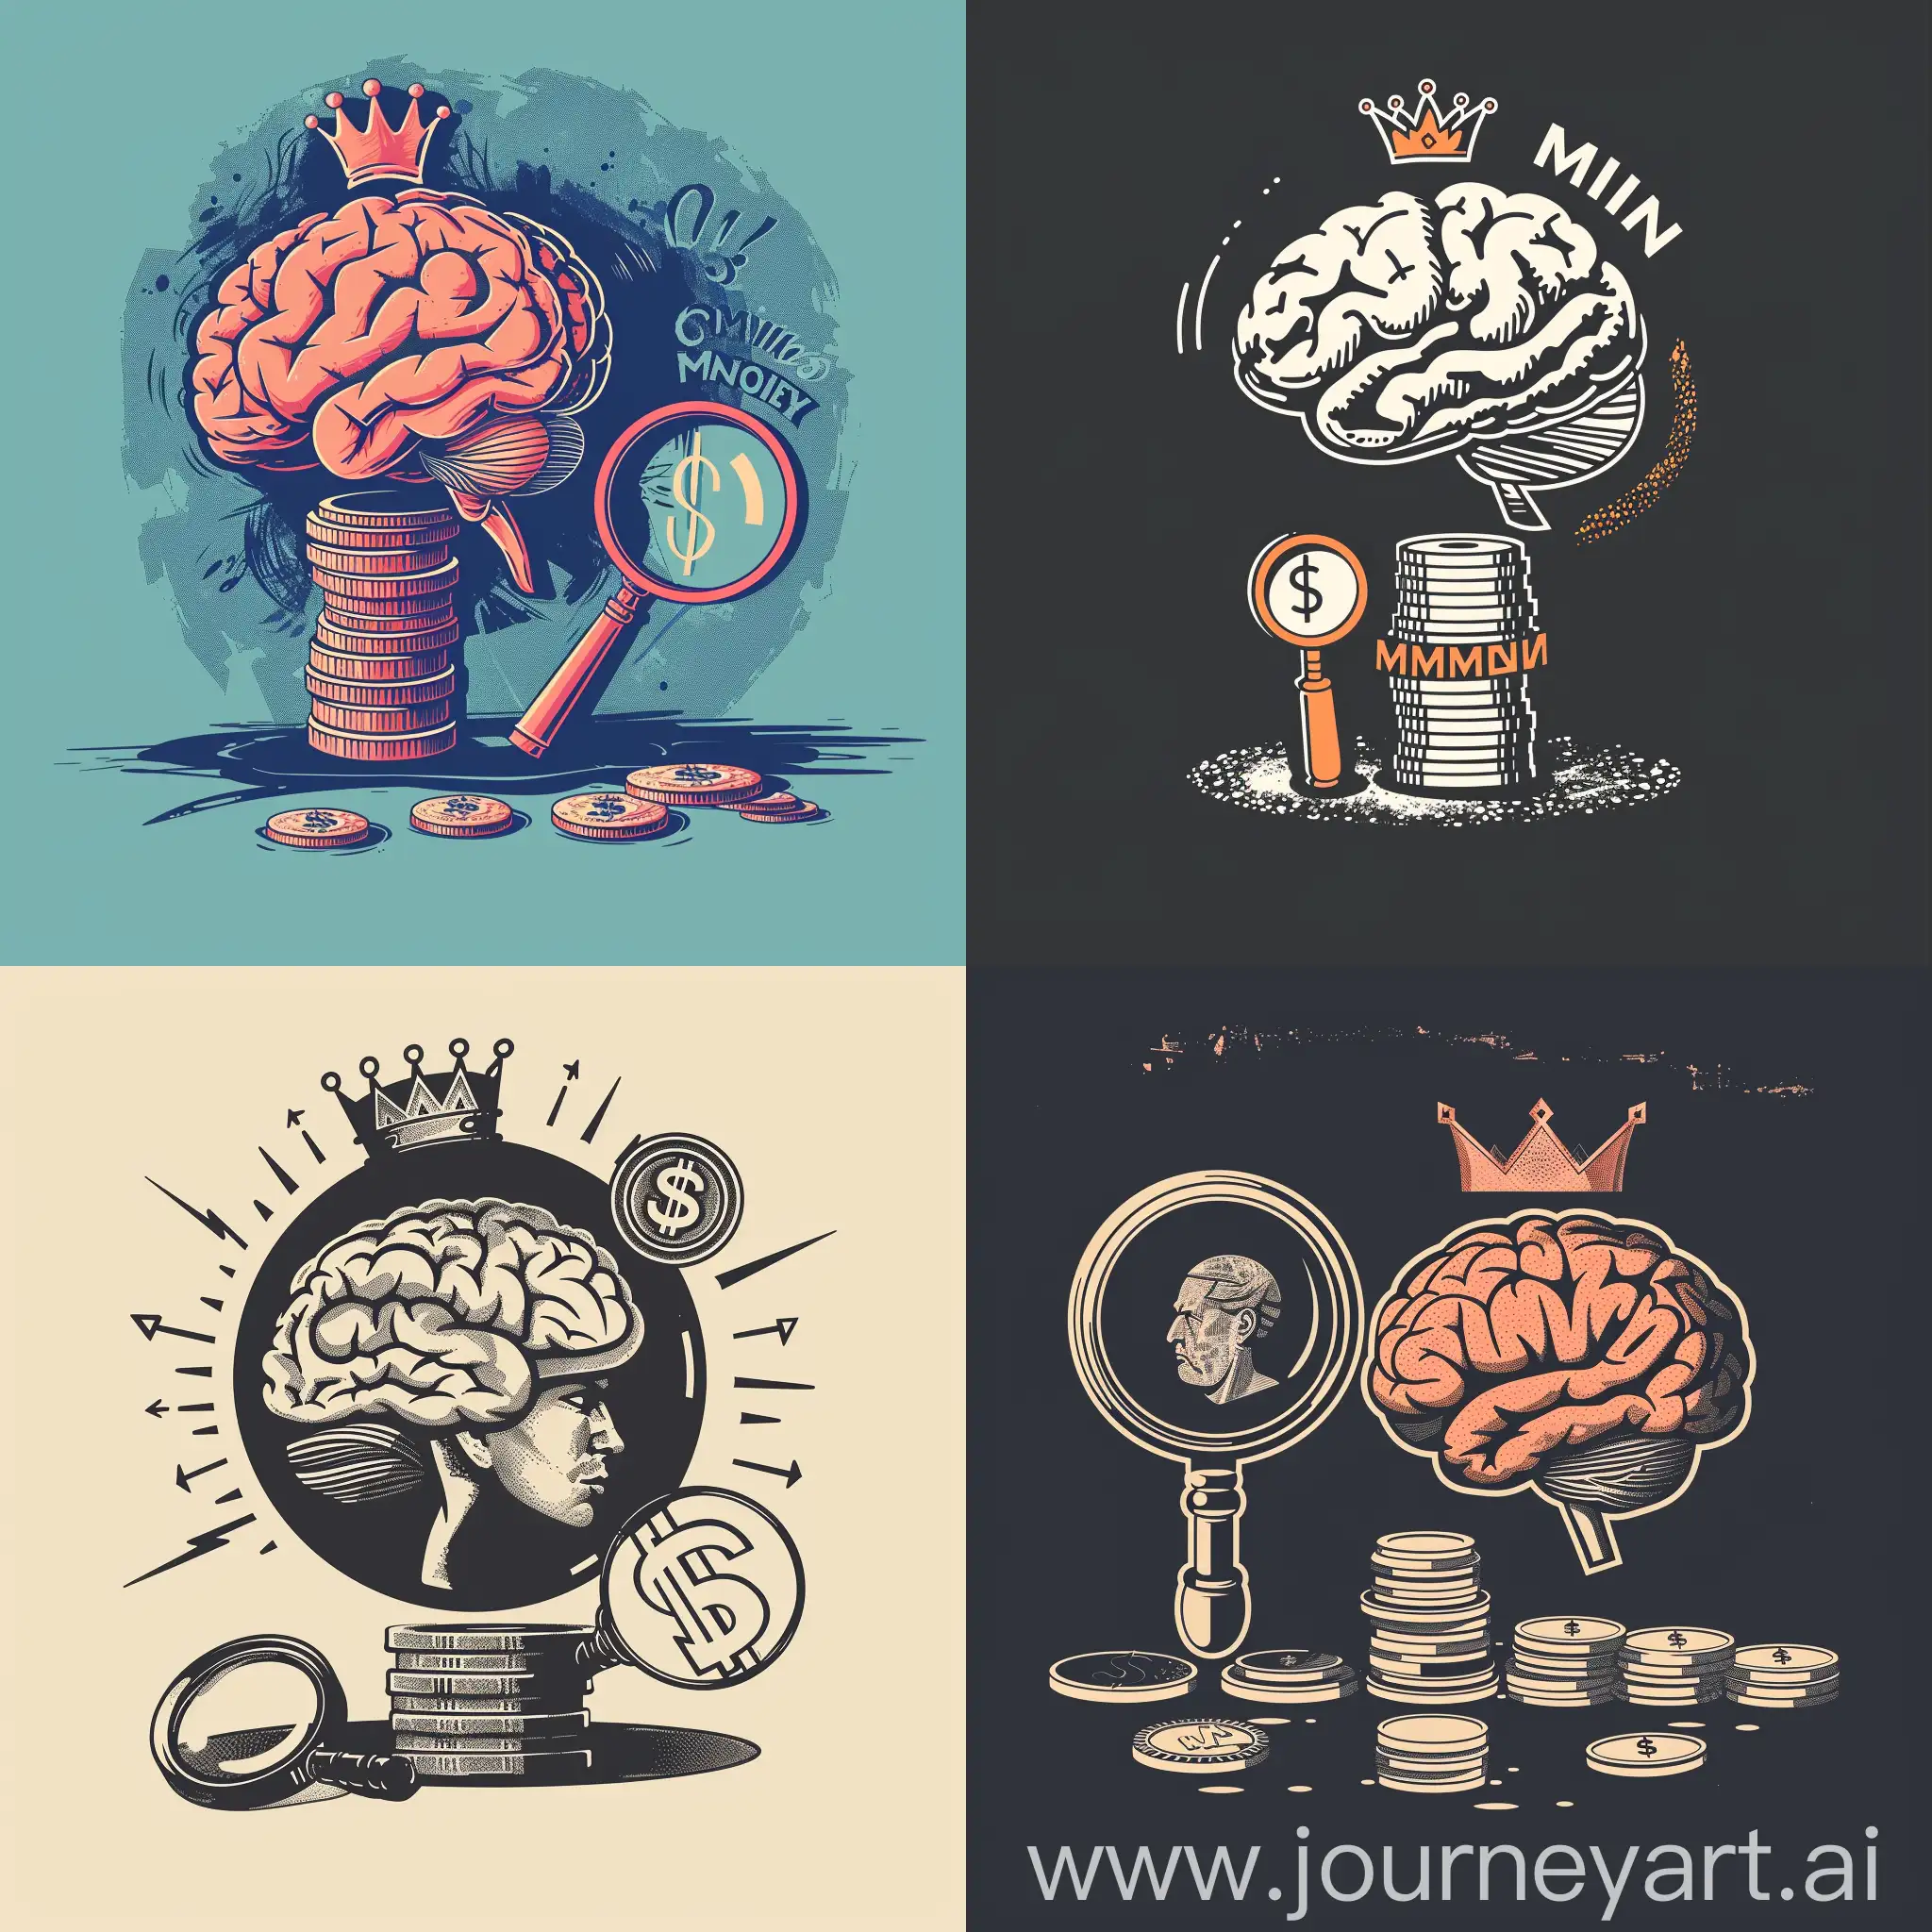 a stylized combination of a brain (representing the "Mind" aspect), a stack of coins or dollar signs (representing "Money"), and perhaps a subtle visual cue like a magnifying glass or a crown (representing "Maven" or expertise). This combination symbolizes intelligence, financial savvy, and mastery in managing money. The font choice should be clean and modern to convey professionalism.